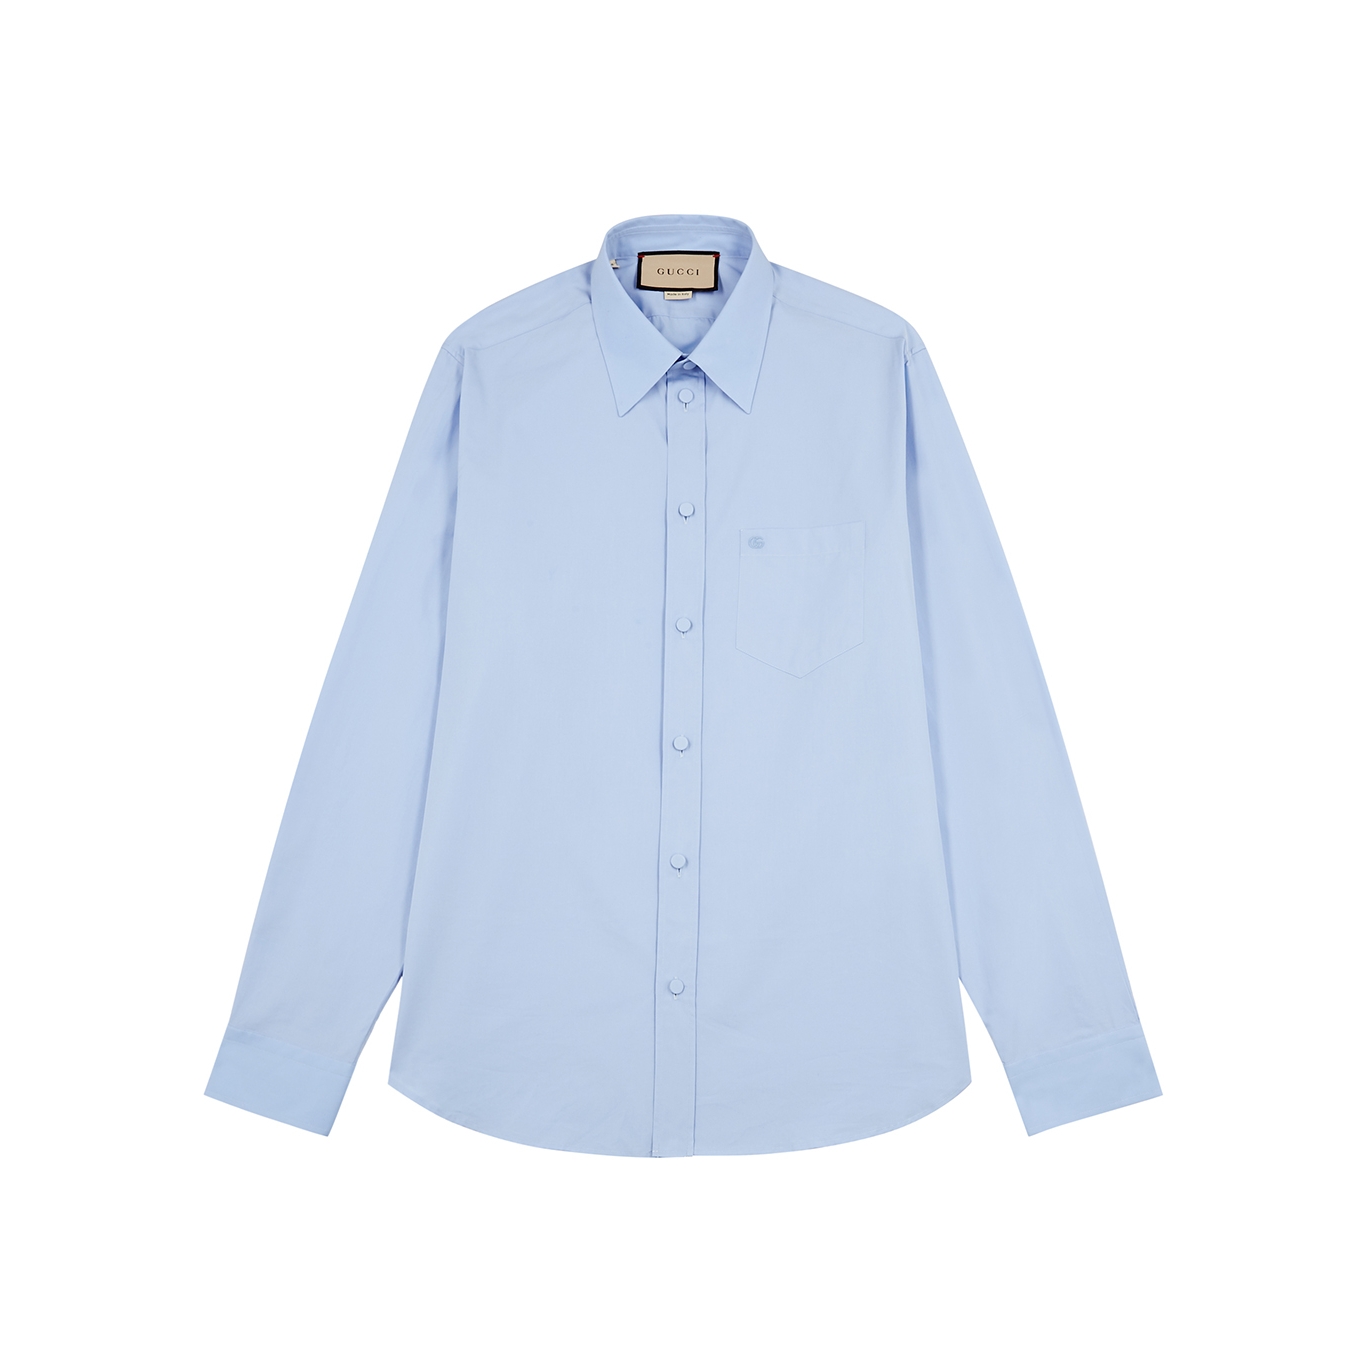 GUCCI LOGO-EMBROIDERED COTTON SHIRT